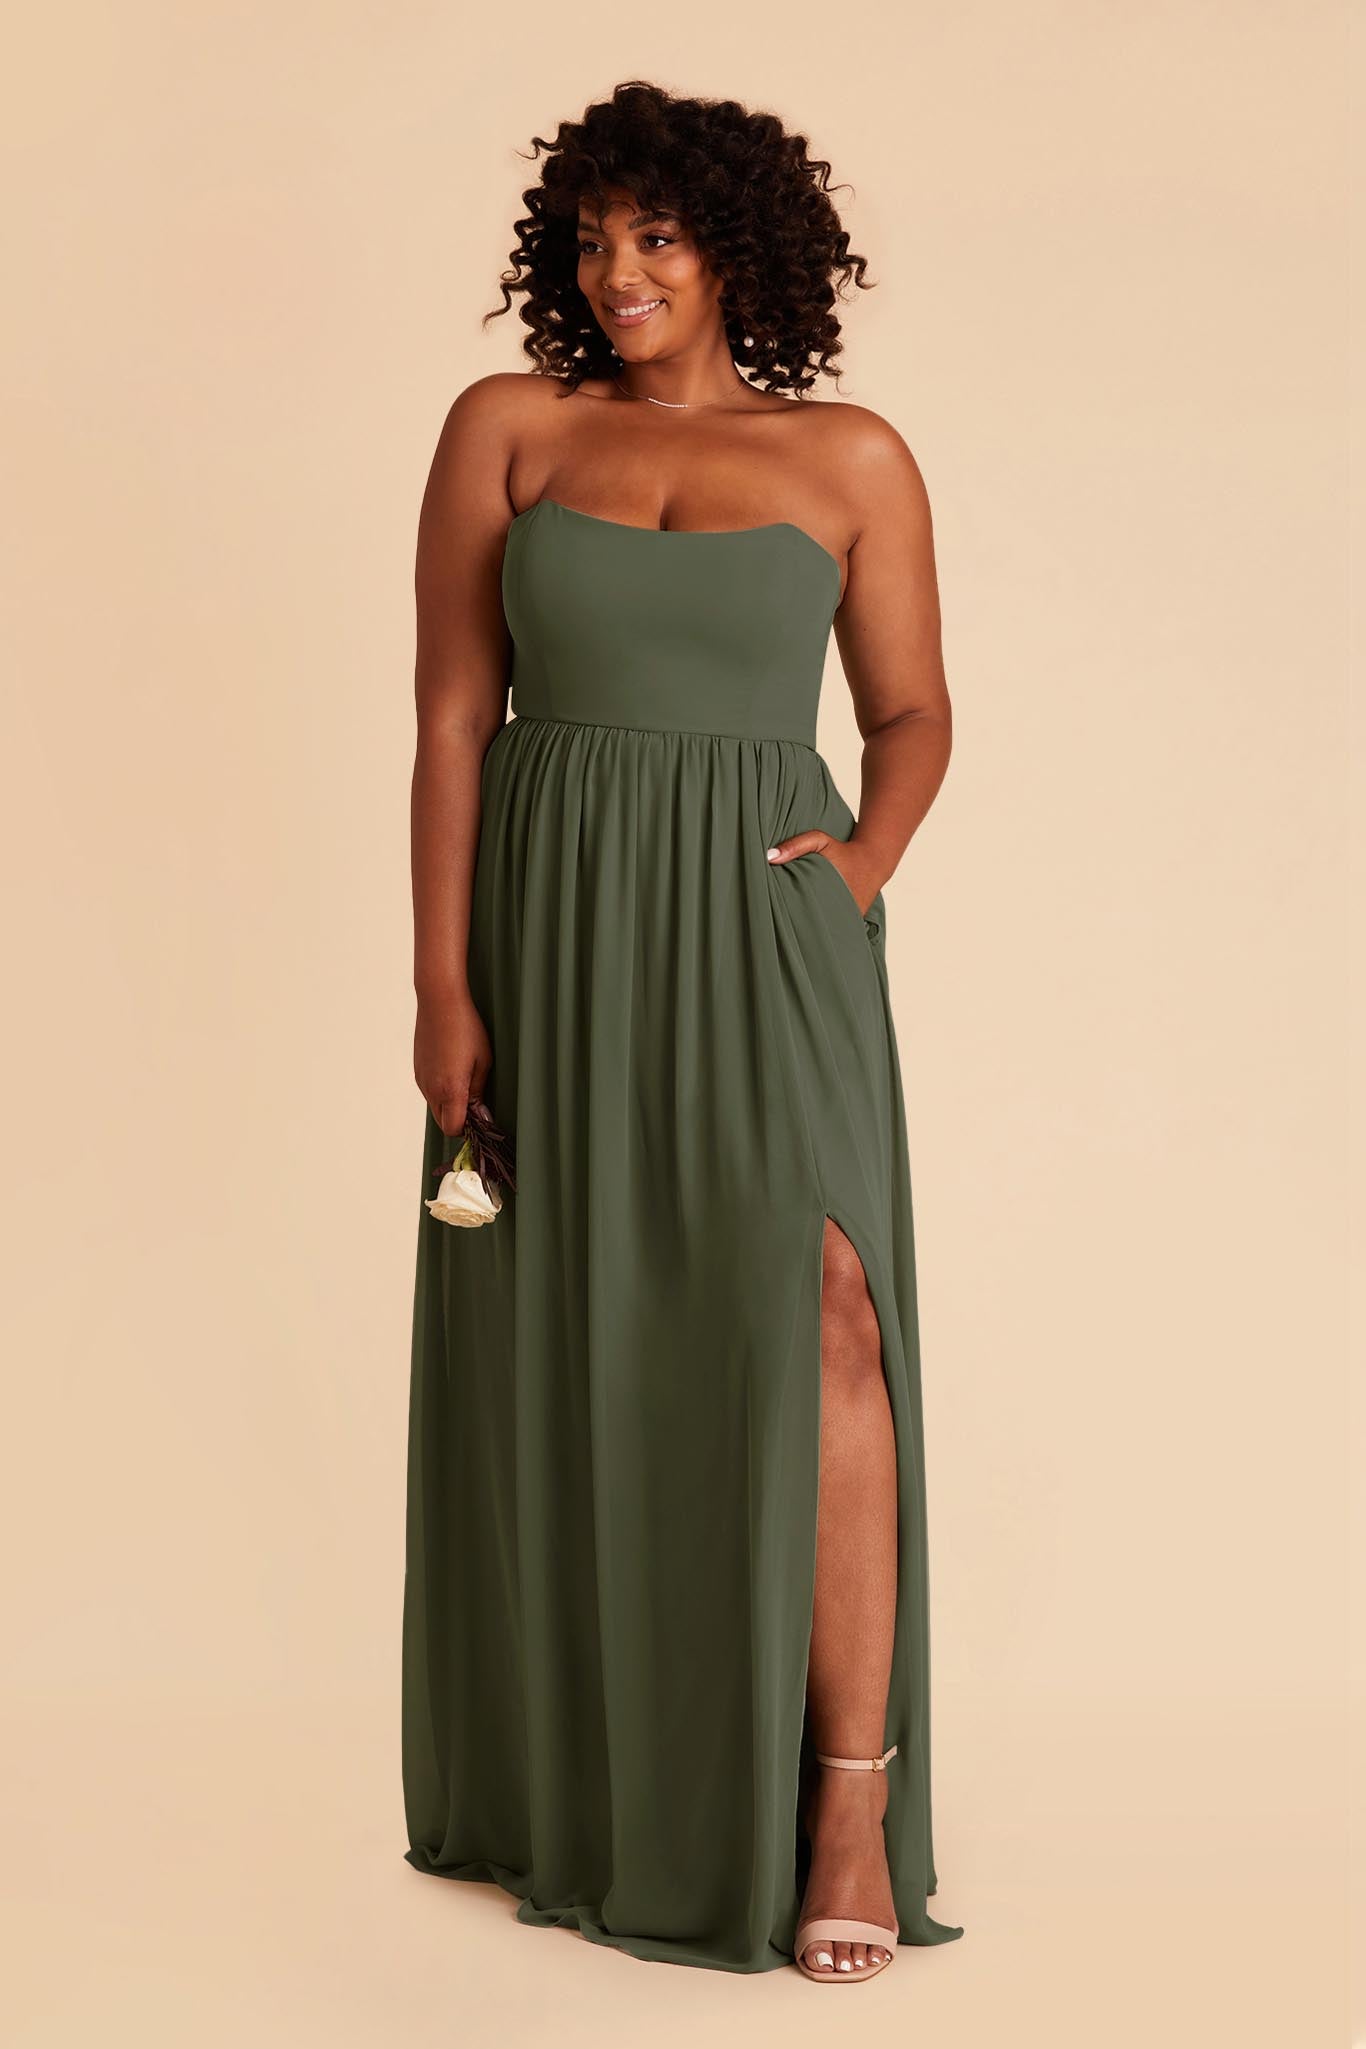 Olive August Convertible Dress by Birdy Grey